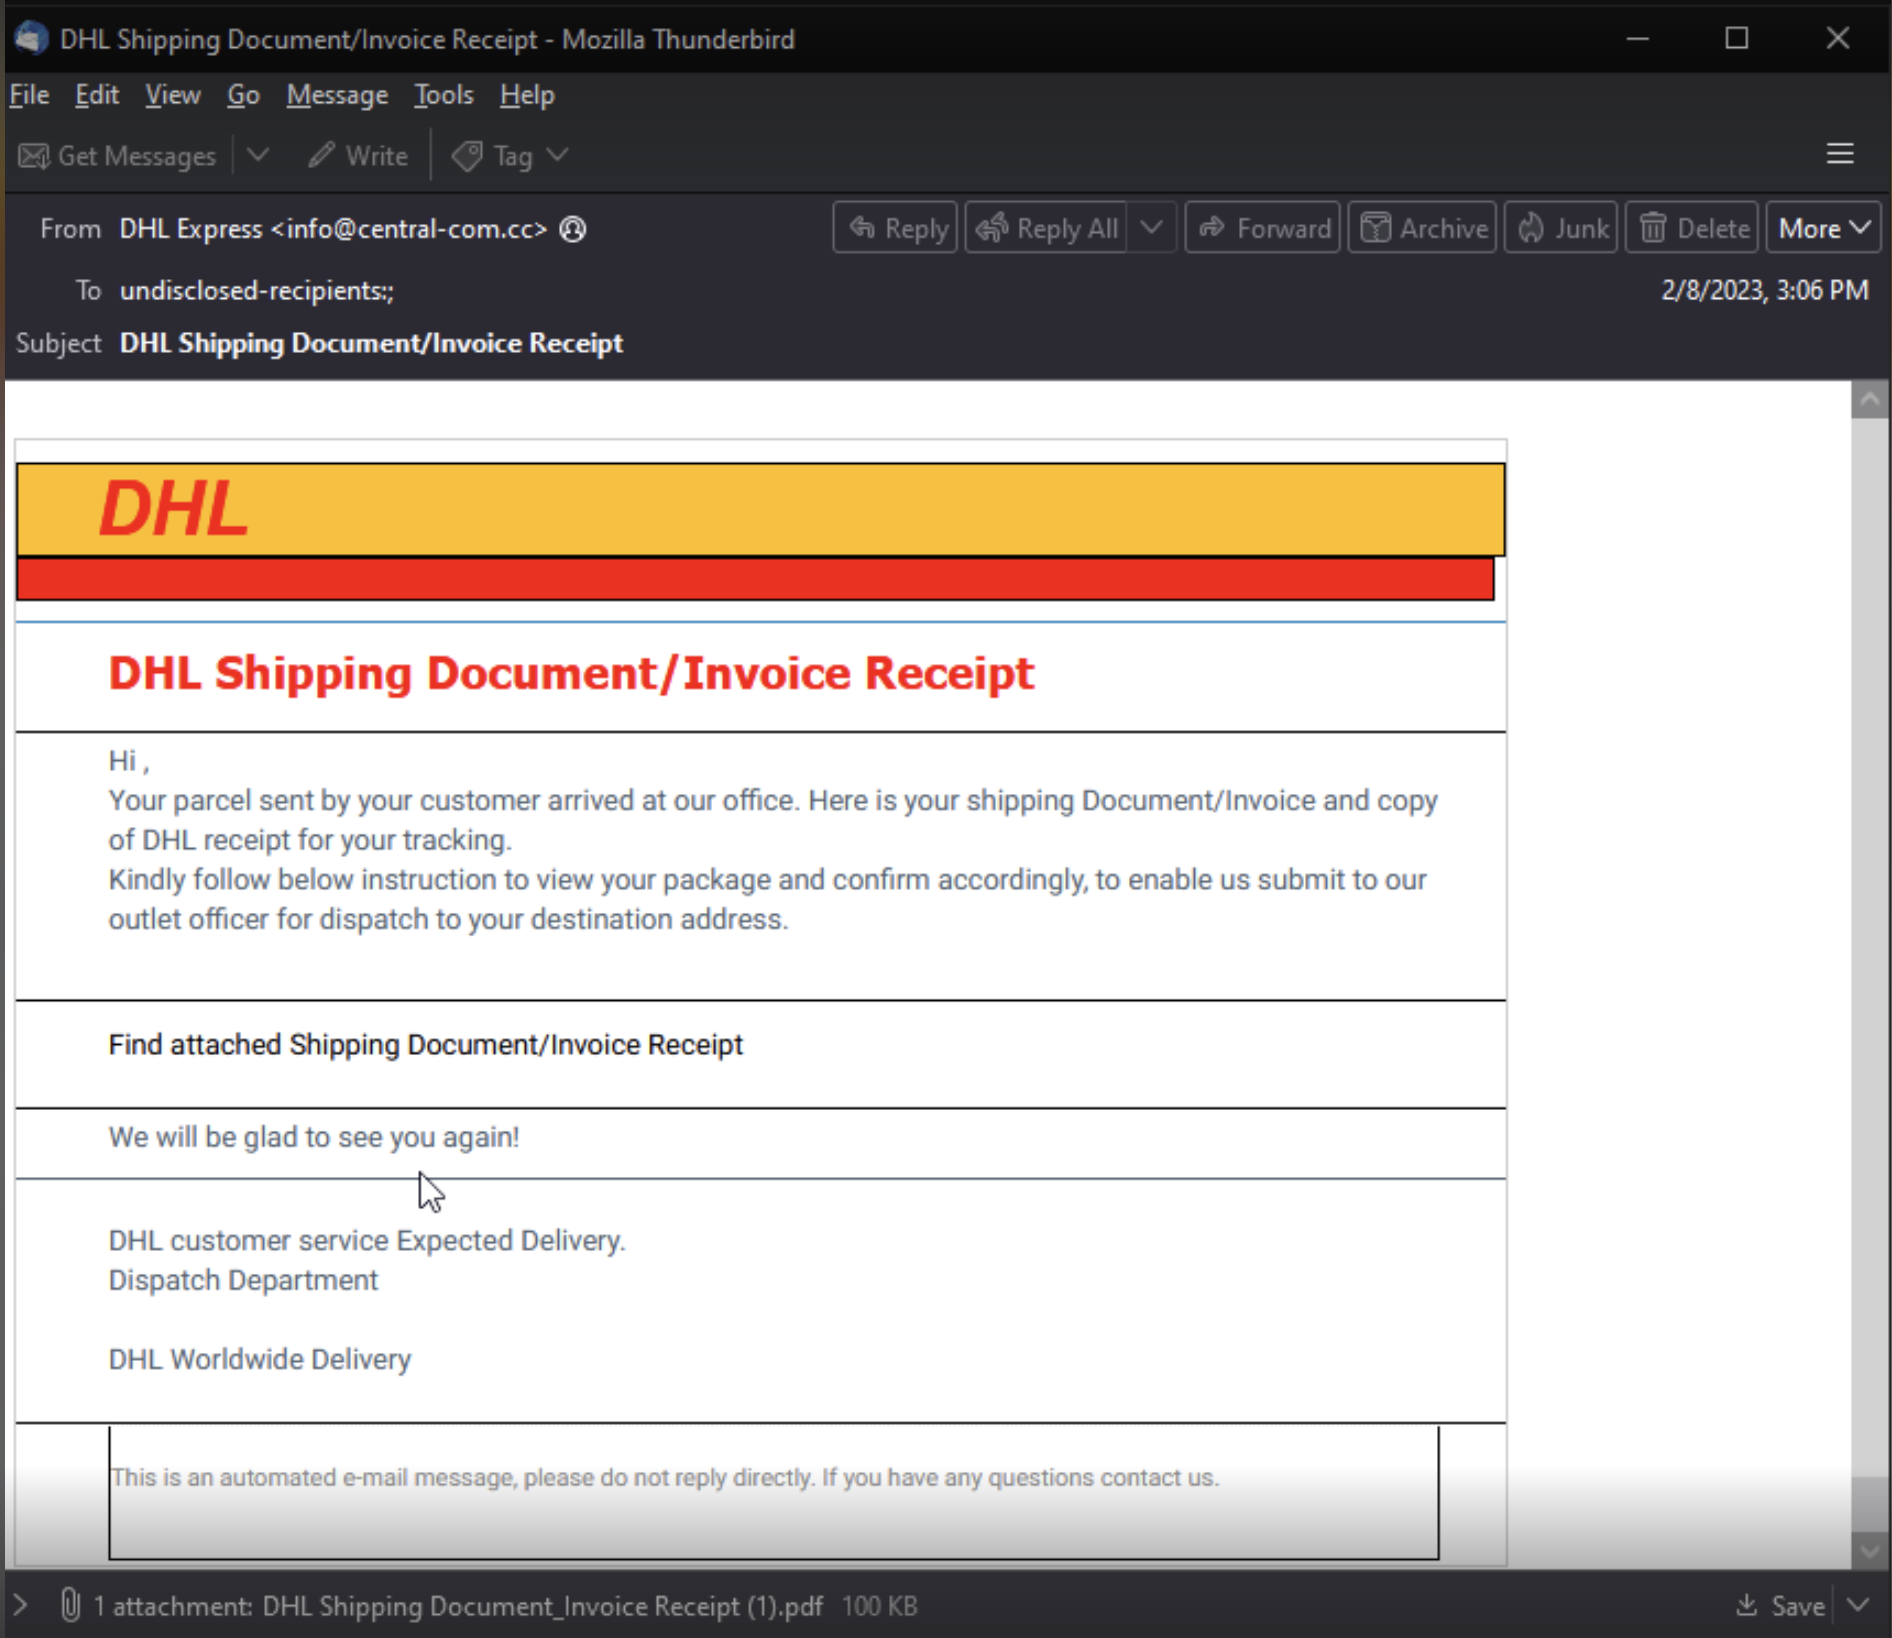 Image 8 is a screenshot of an email phishing lure. It is disguised to resemble a DHL shipping invoice.